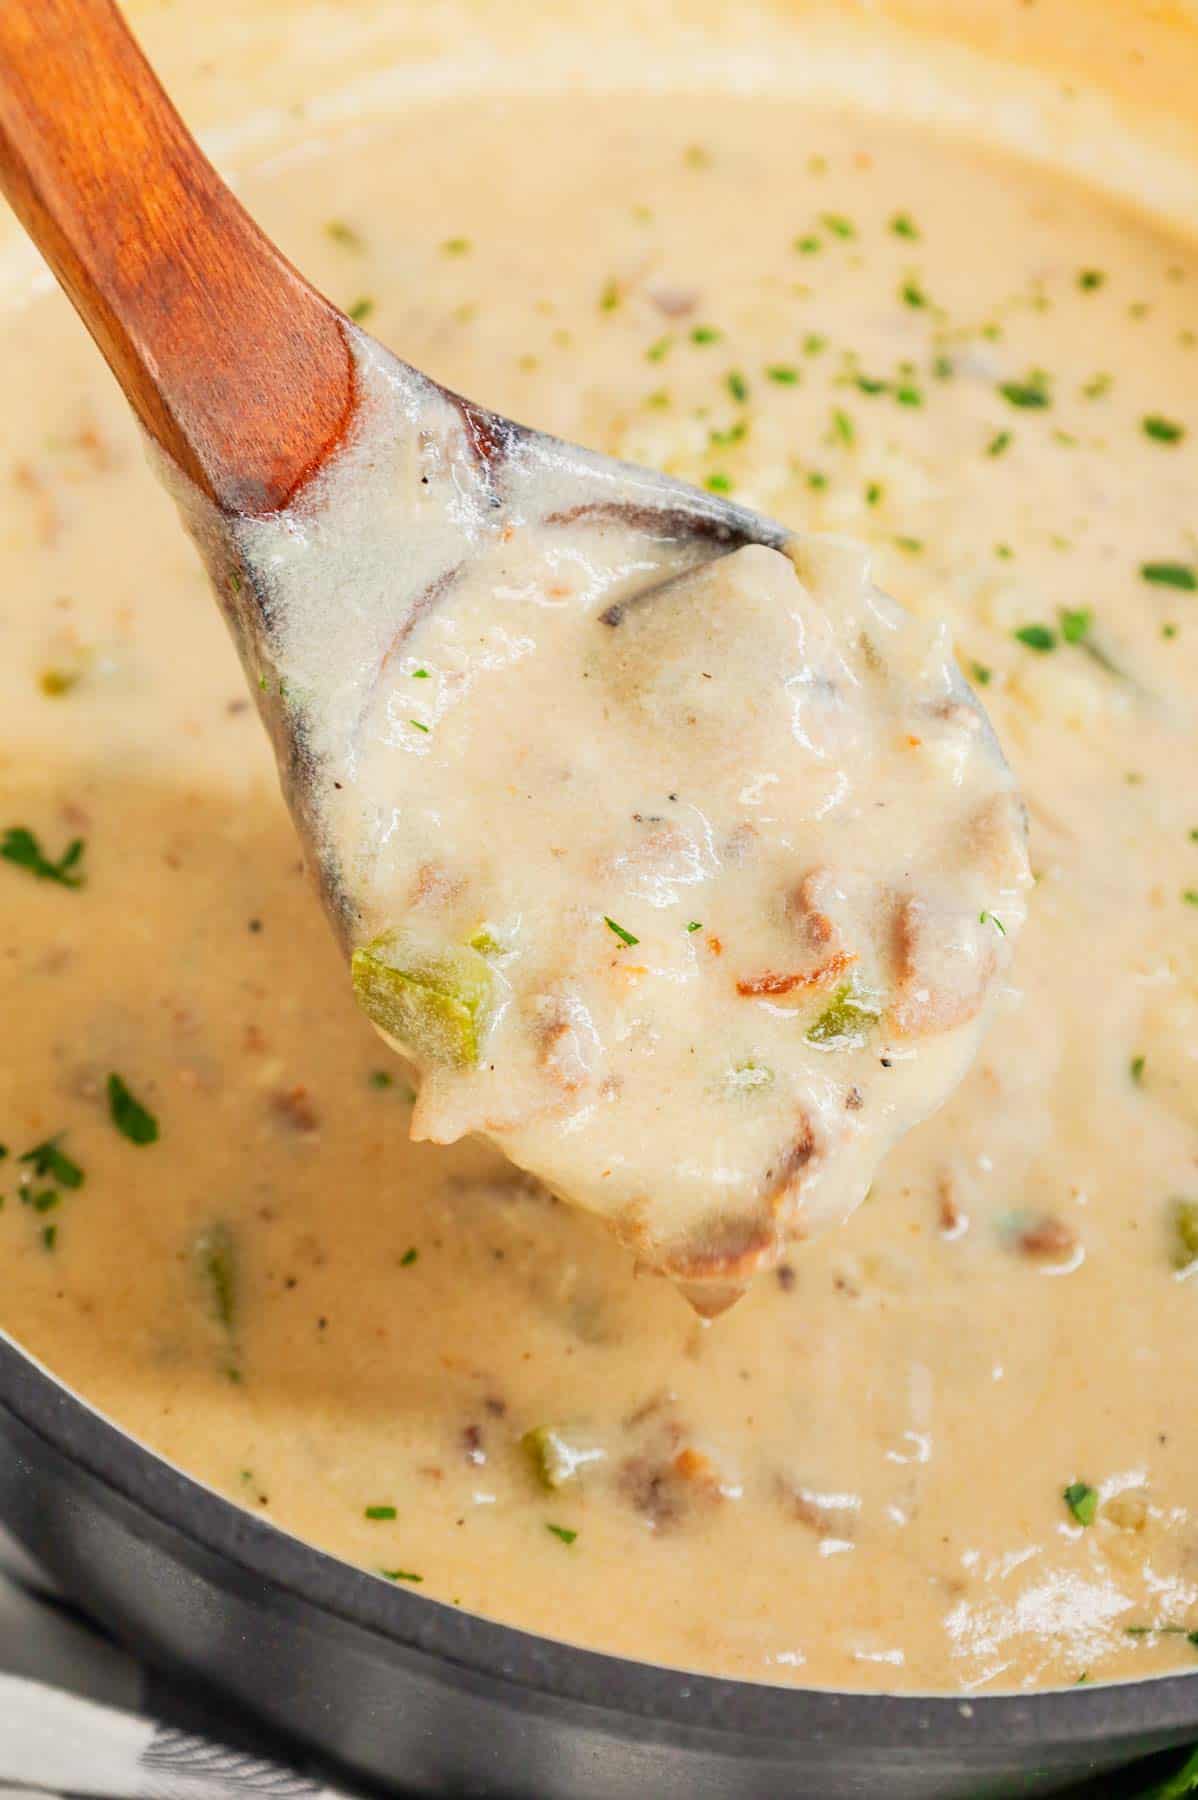 Philly Cheese Steak Soup is a hearty soup loaded with chopped deli roast beef, diced onions, green bell peppers, sliced mushrooms and provolone cheese.